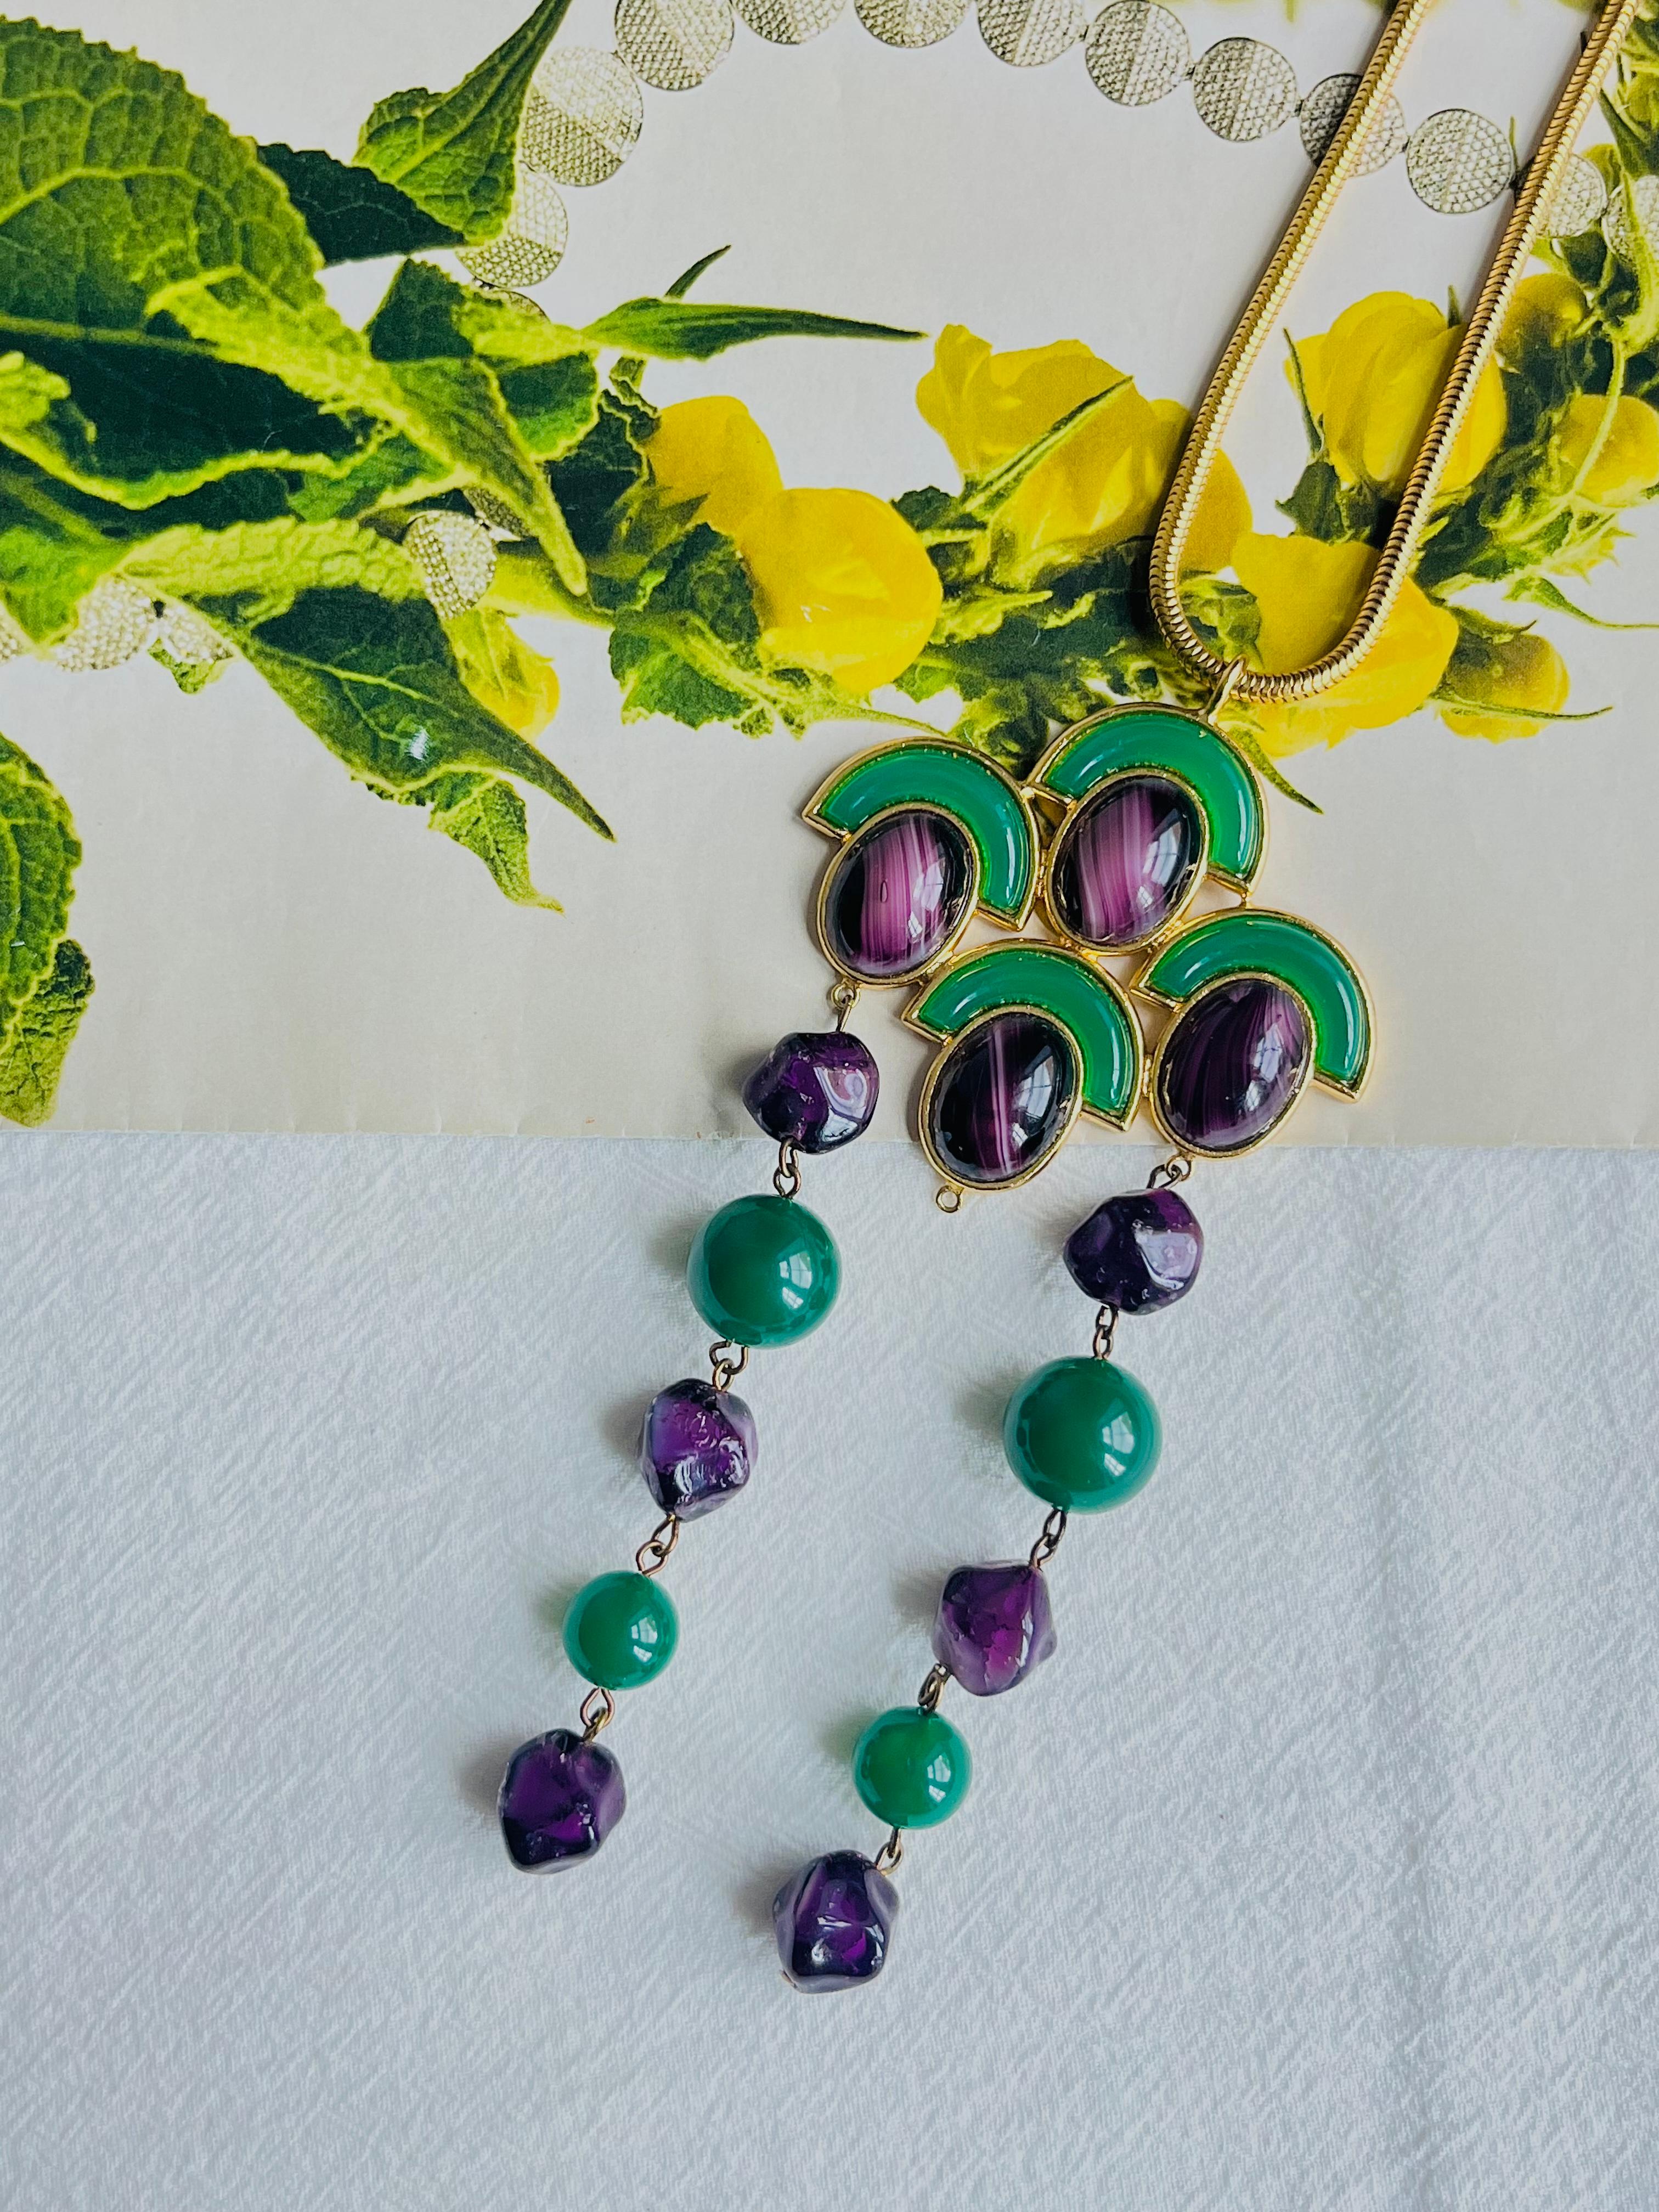 Christian Dior Vintage 1971 Emerald Amethyst Cabochon Fans Tassel Long Necklace In Excellent Condition For Sale In Wokingham, England